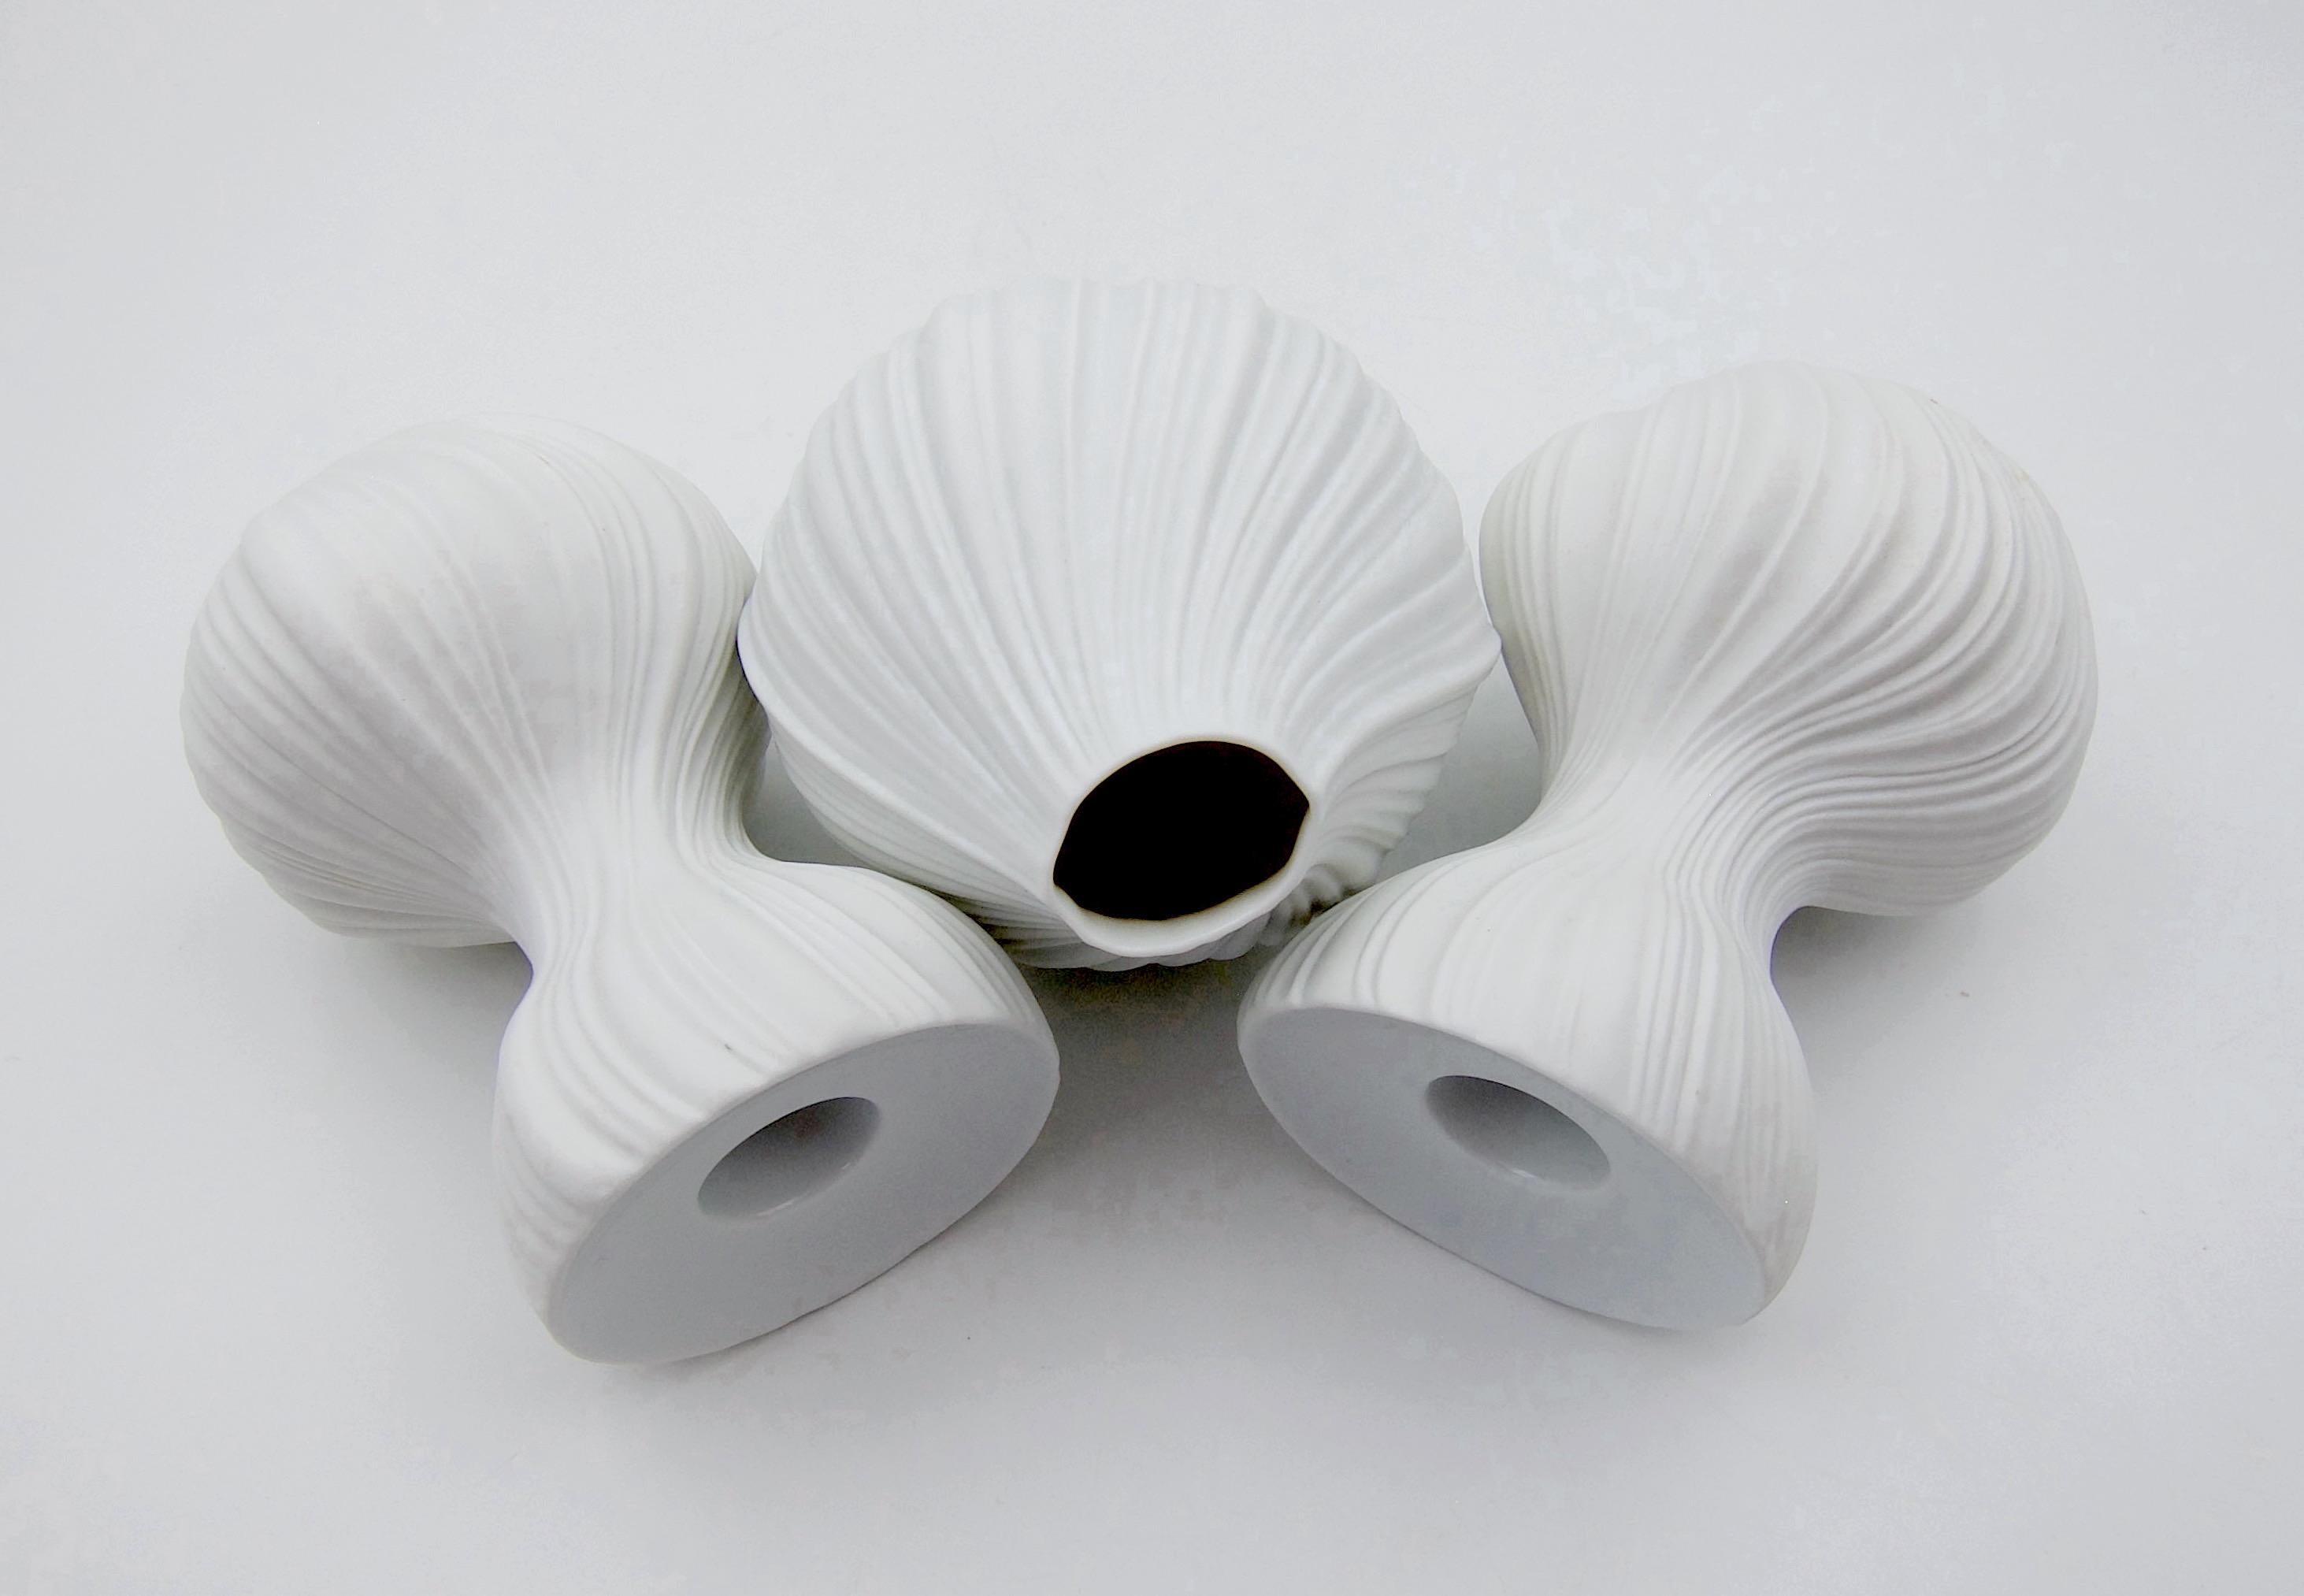 White Bisque Porcelain Plissee Vase and Candle Holders by Martin Freyer For Sale 2